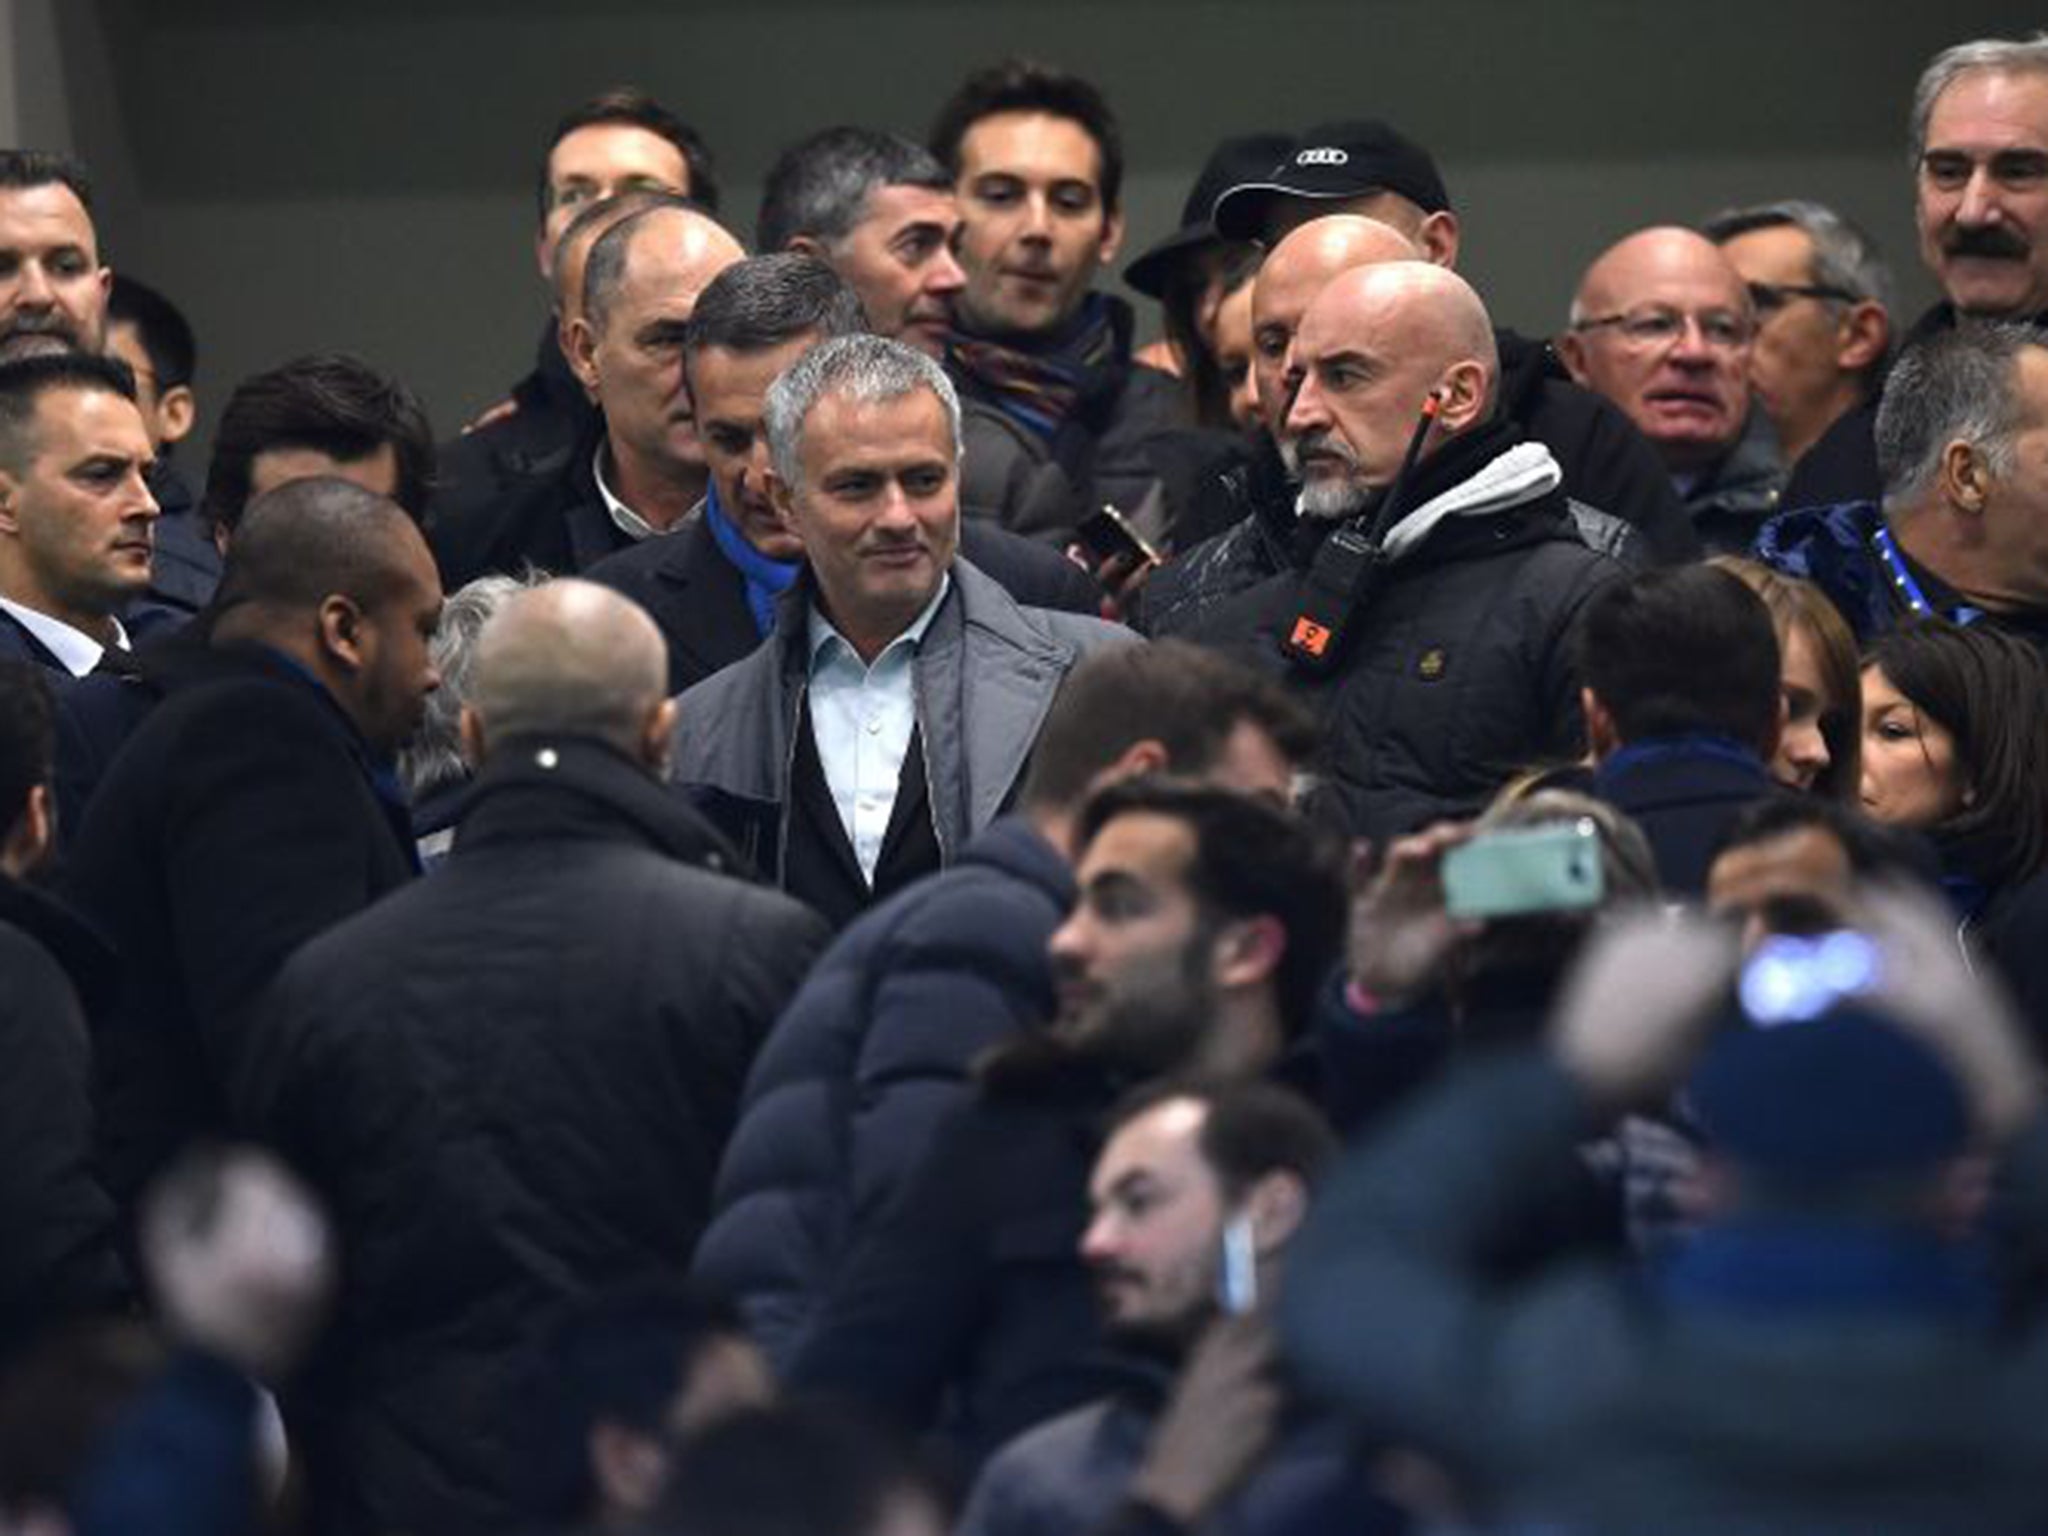 Jose Mourinho, centre, was in attendance at the match between Inter and Sampdoria in Milan